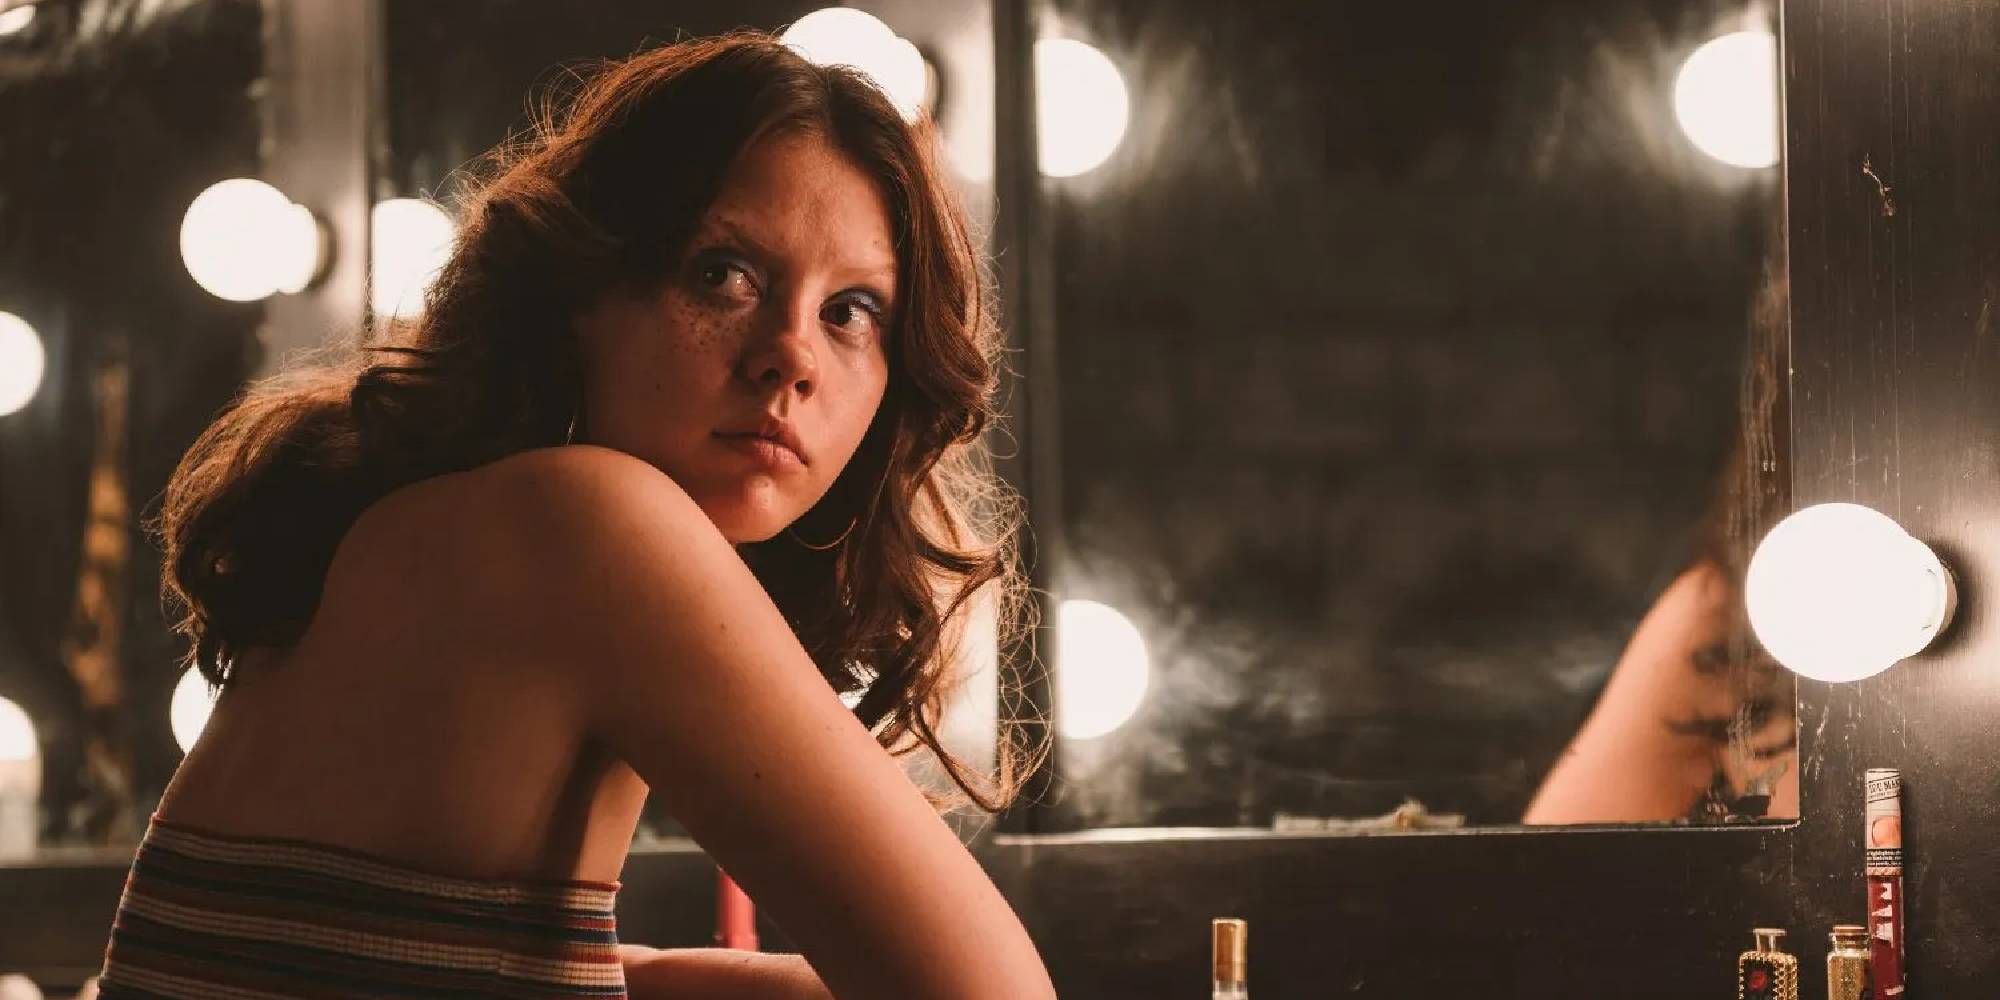 A shot of Mia Goth as Maxine sitting in front of a mirror in X.